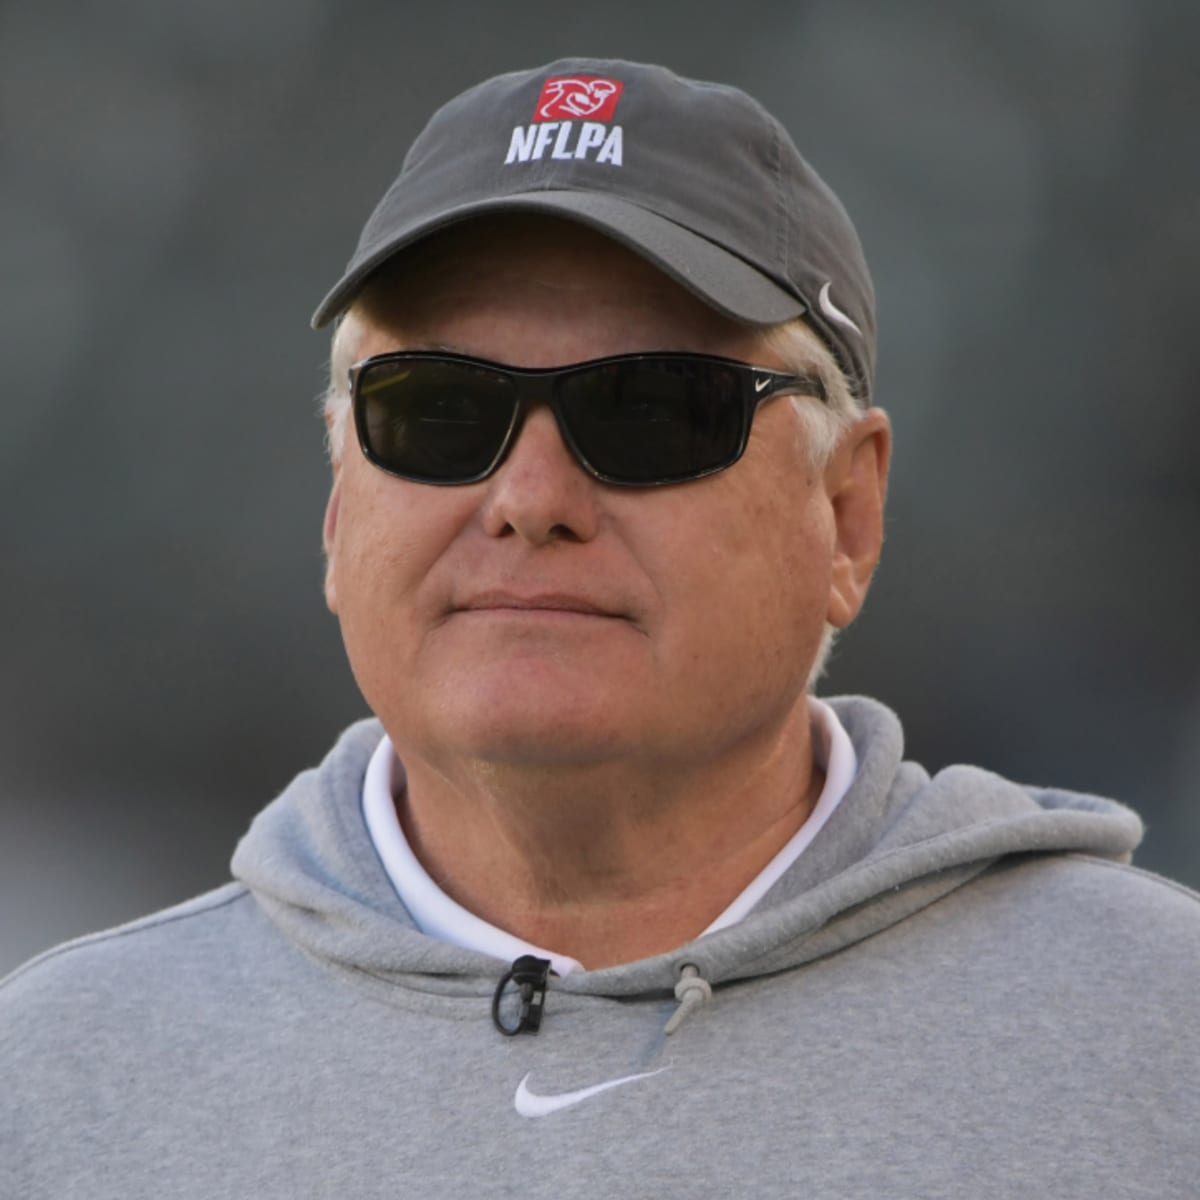 Did Mike Martz get exposed as a mediocre NFL coach once Kurt